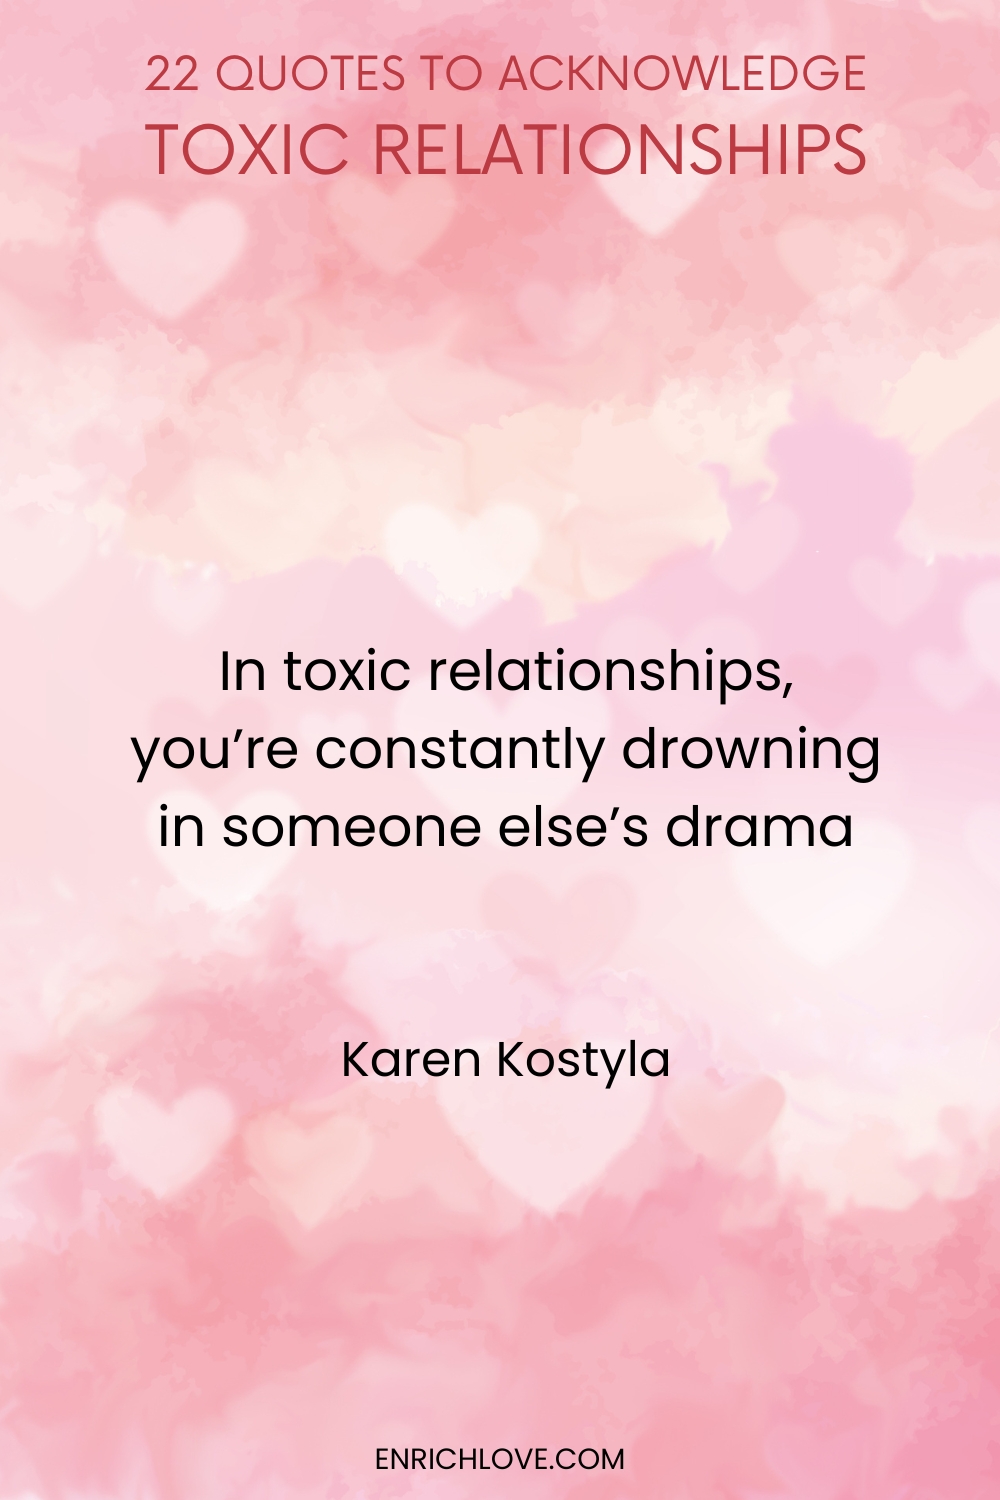 22 Quotes to Acknowledge Toxic Relationships -In toxic relationships, you're constantly drowning in someone else's drama by Karen Kostyla